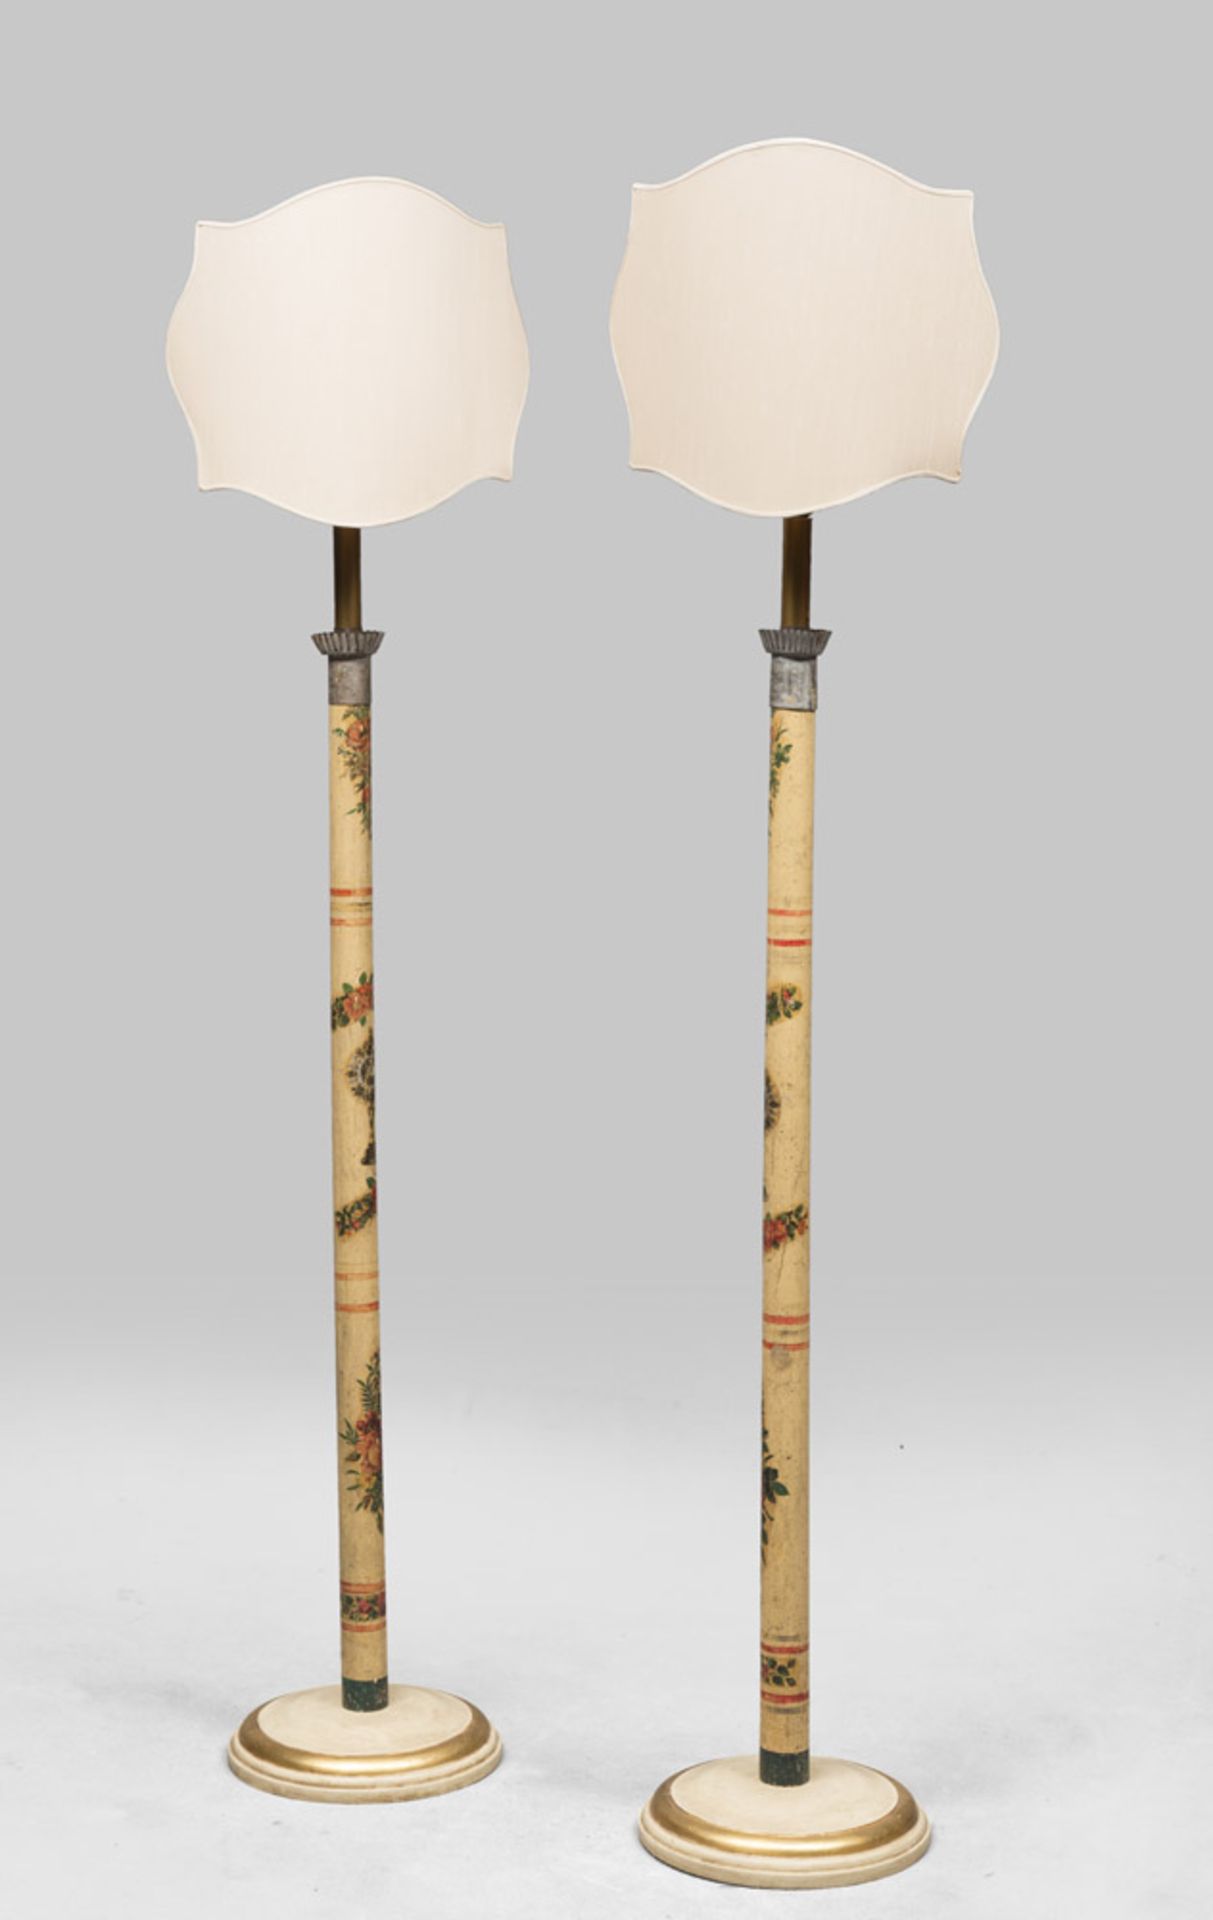 A PAIR OF FLOOR CANDLESTICKS, VENETIAN LATE 18TH CENTURY yellow lacquered shaft painted with